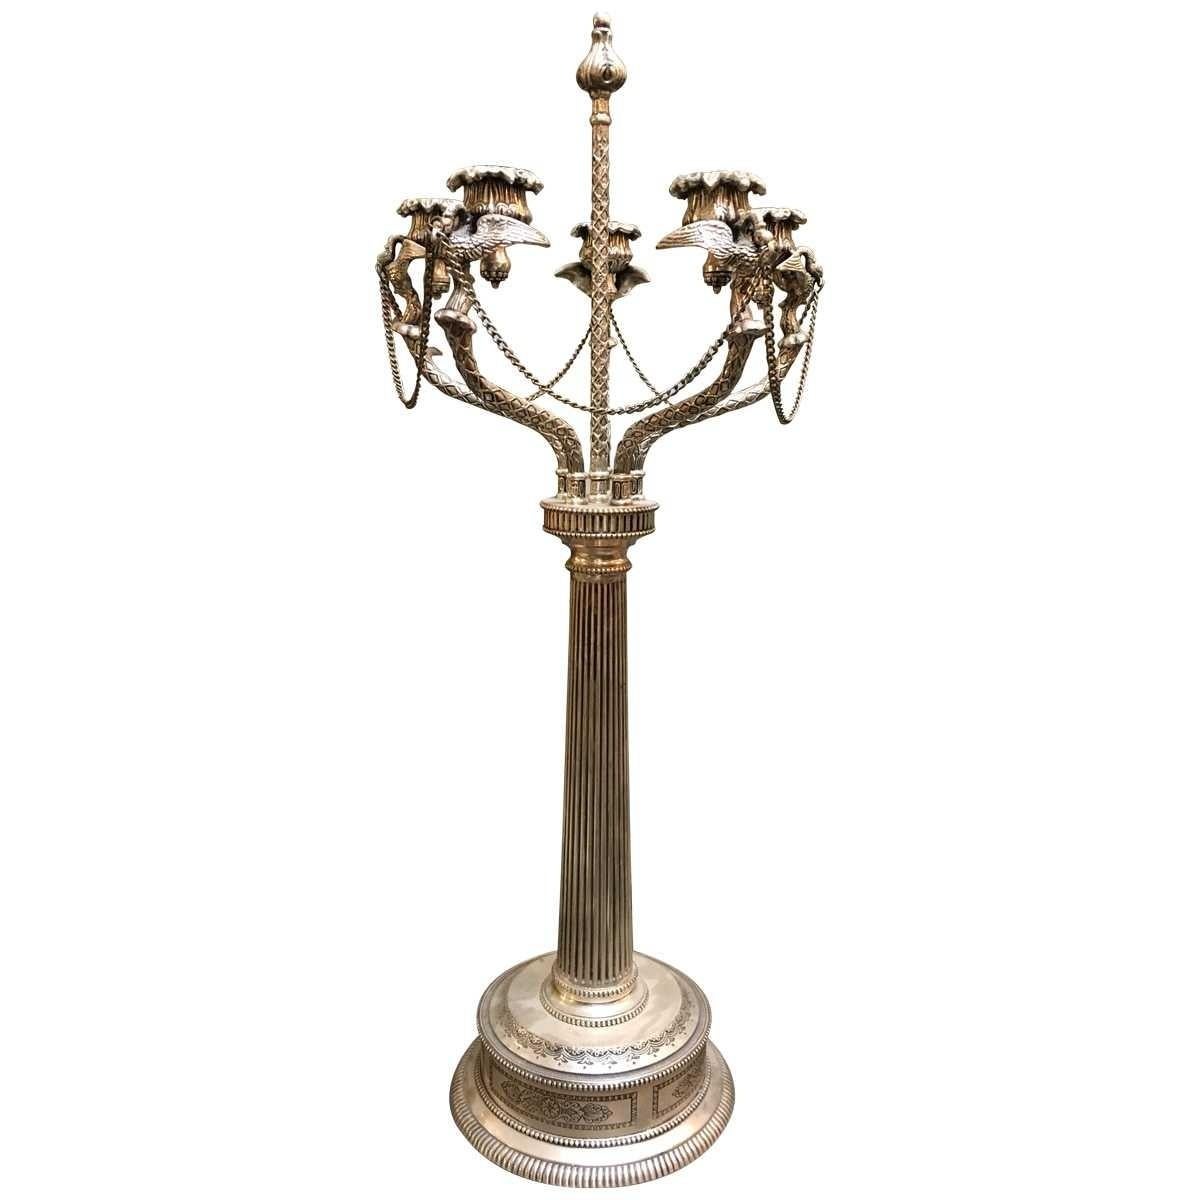 Neoclassical takes its roots from Greek and Roman discoveries in the eighteenth century with a style that is lush and elegant. Vintage six-light, thought to be pewter, elaborately designed candleholder.
Features tulip cups with avian adornments